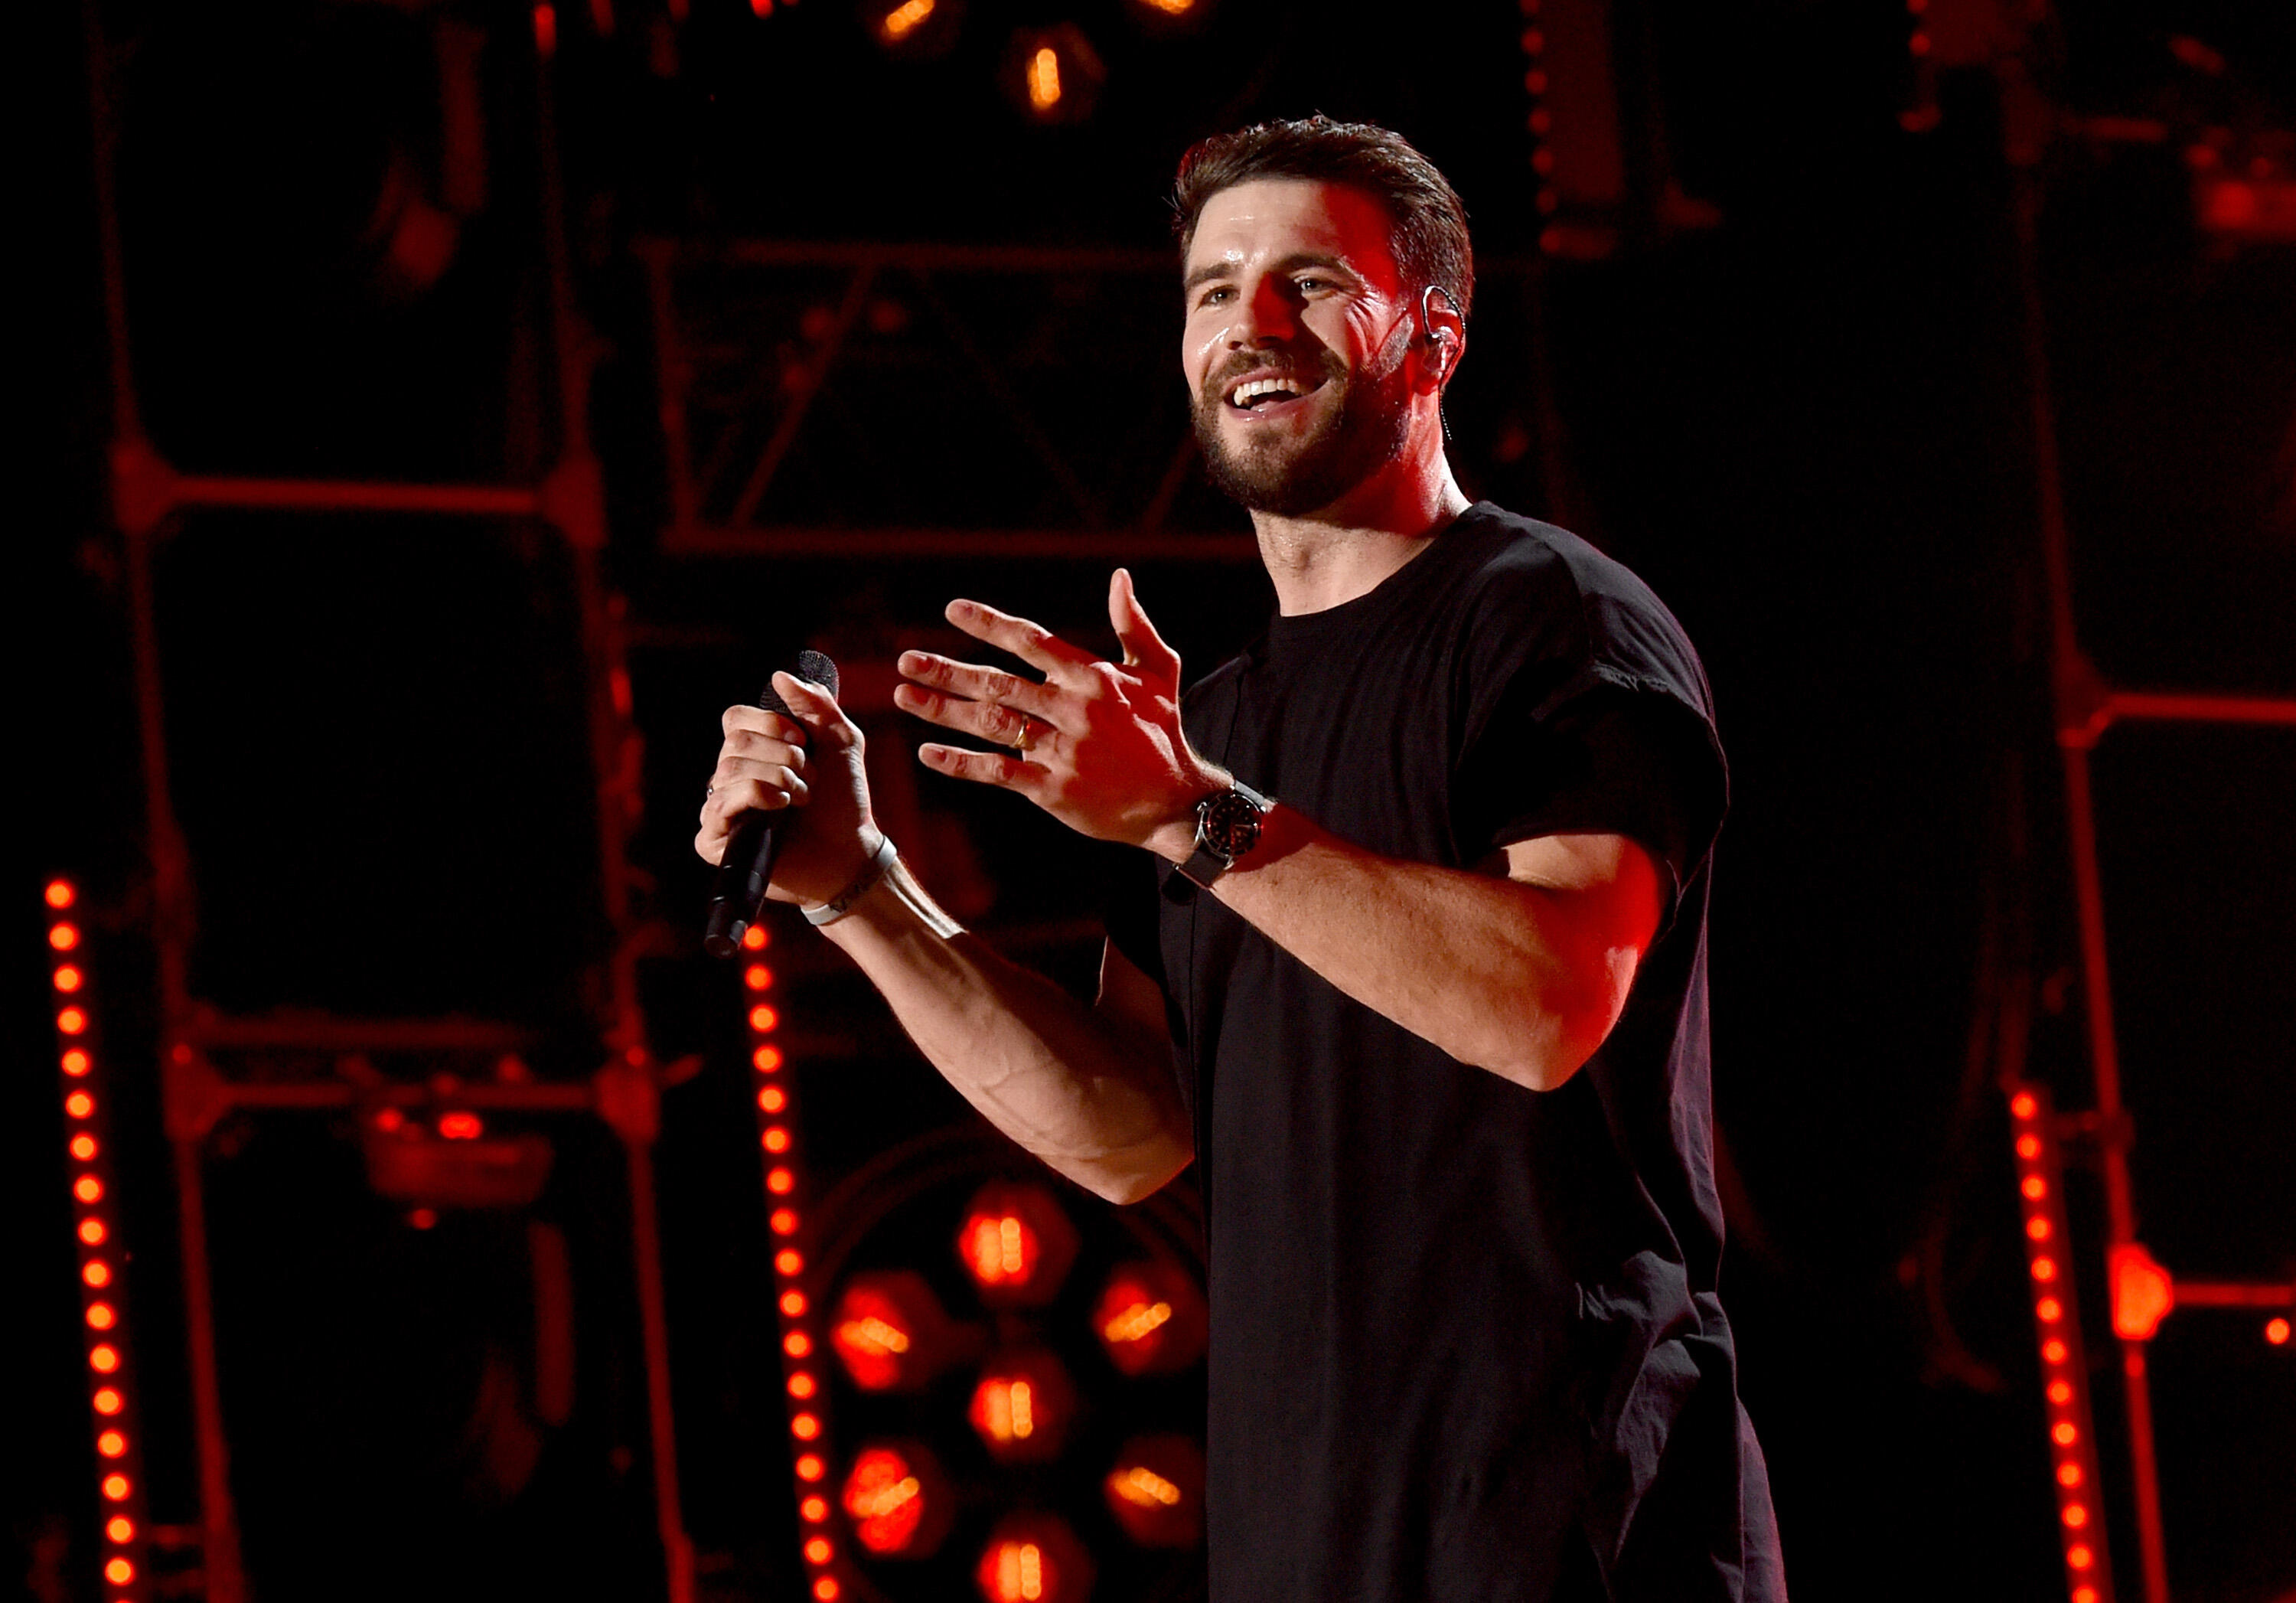 NASHVILLE, TN - JUNE 09:  (EDITORIAL USE ONLY)  Singer-songwriter Sam Hunt performs onstage during day 2 of the 2017 CMA Music Festival on June 9, 2017 in Nashville, Tennessee.  (Photo by Rick Diamond/Getty Images)